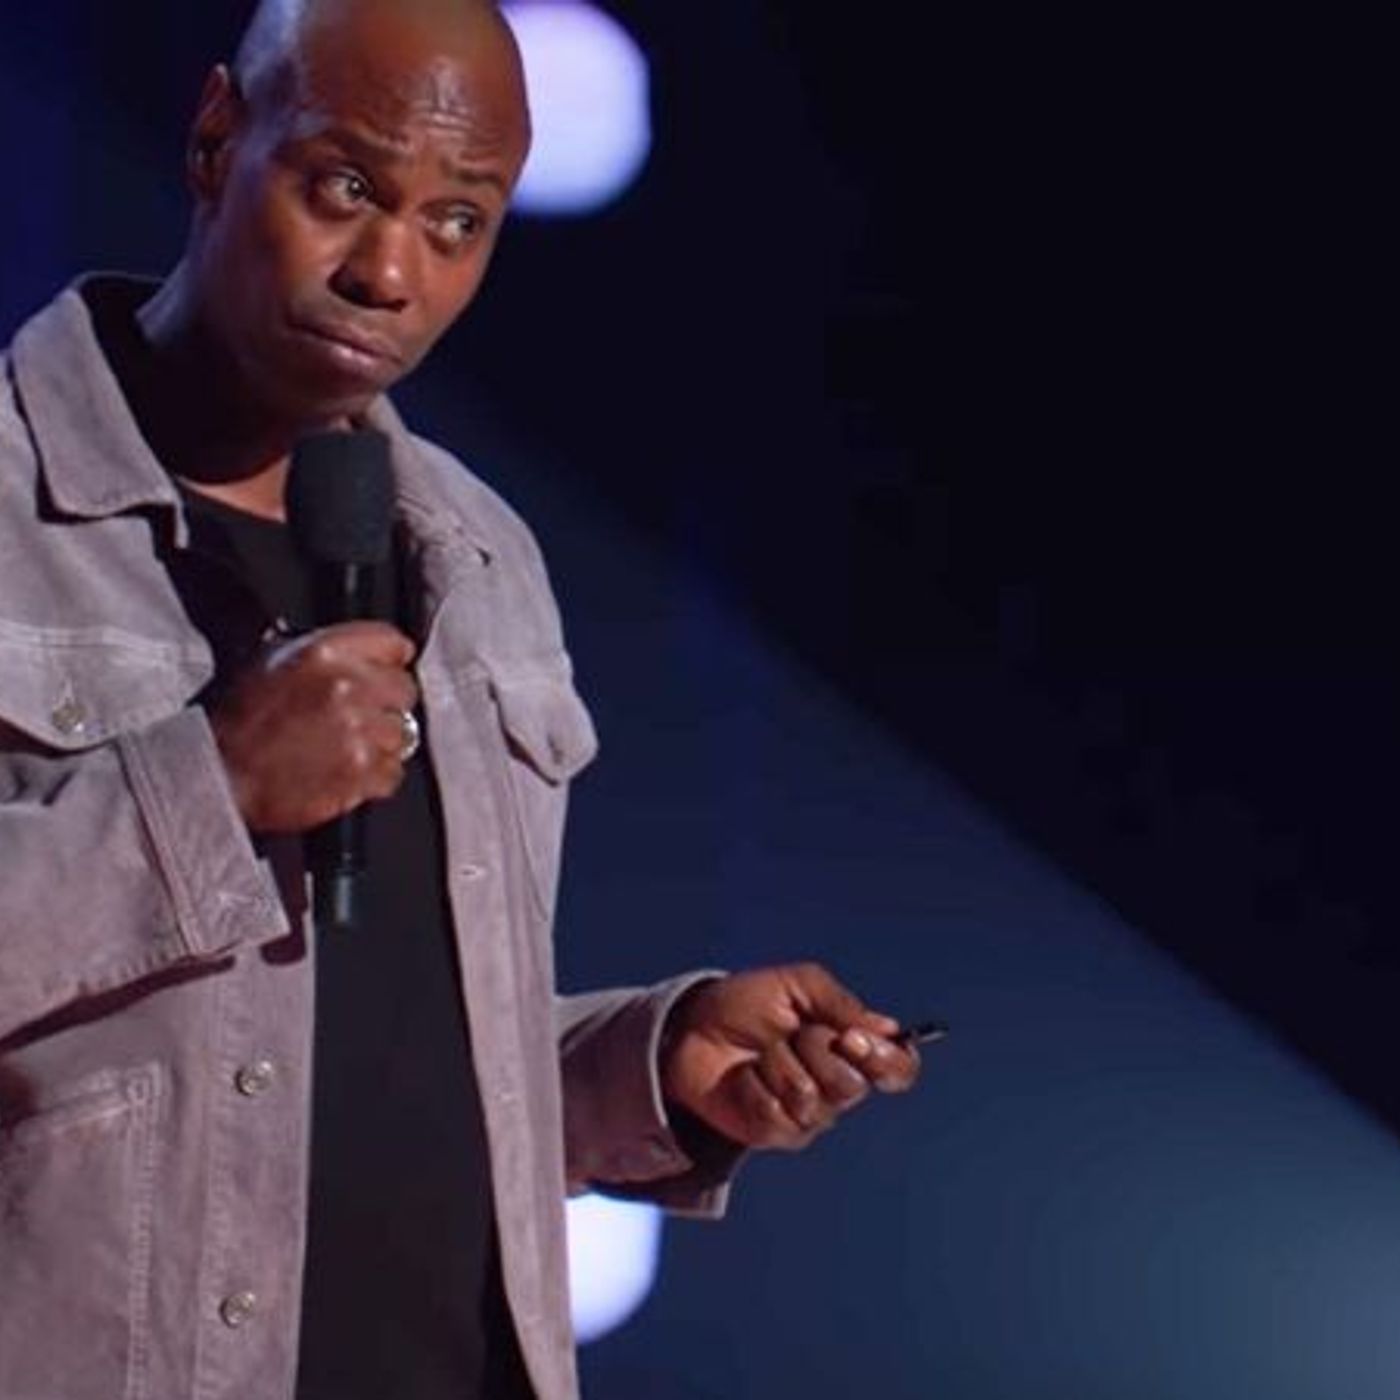 Ep. 47 Dave Chappelle - Equanimity